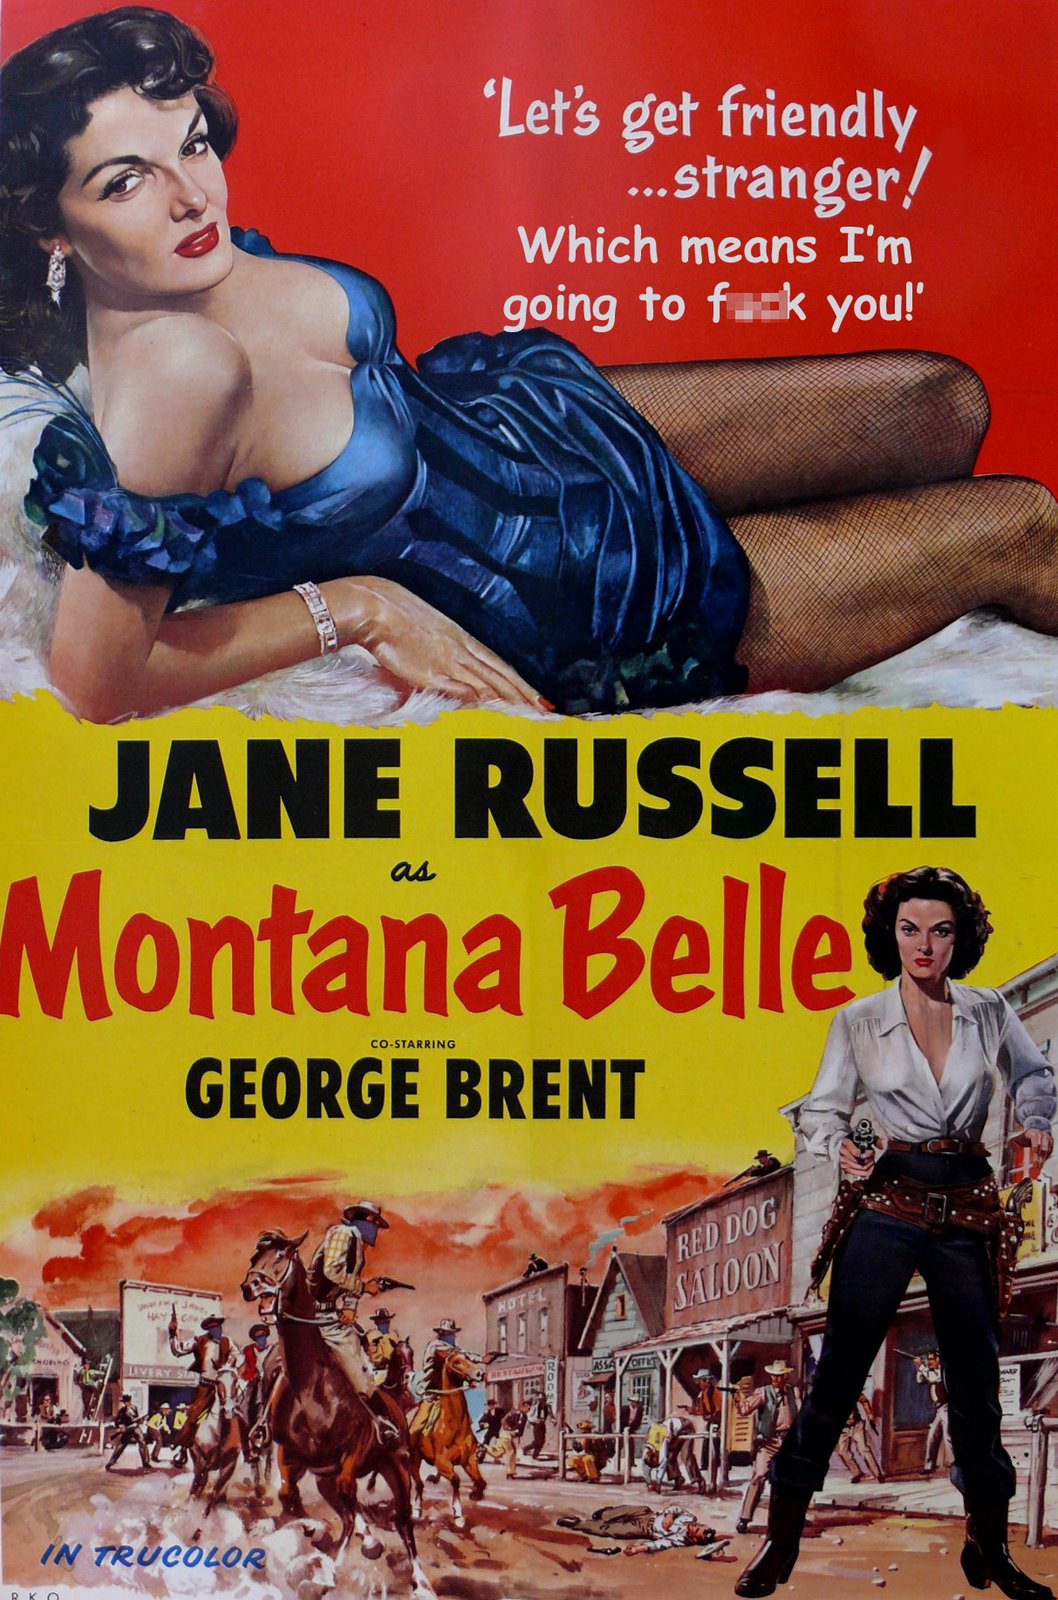 8 inappropriate movie posters that would never be allowed today.